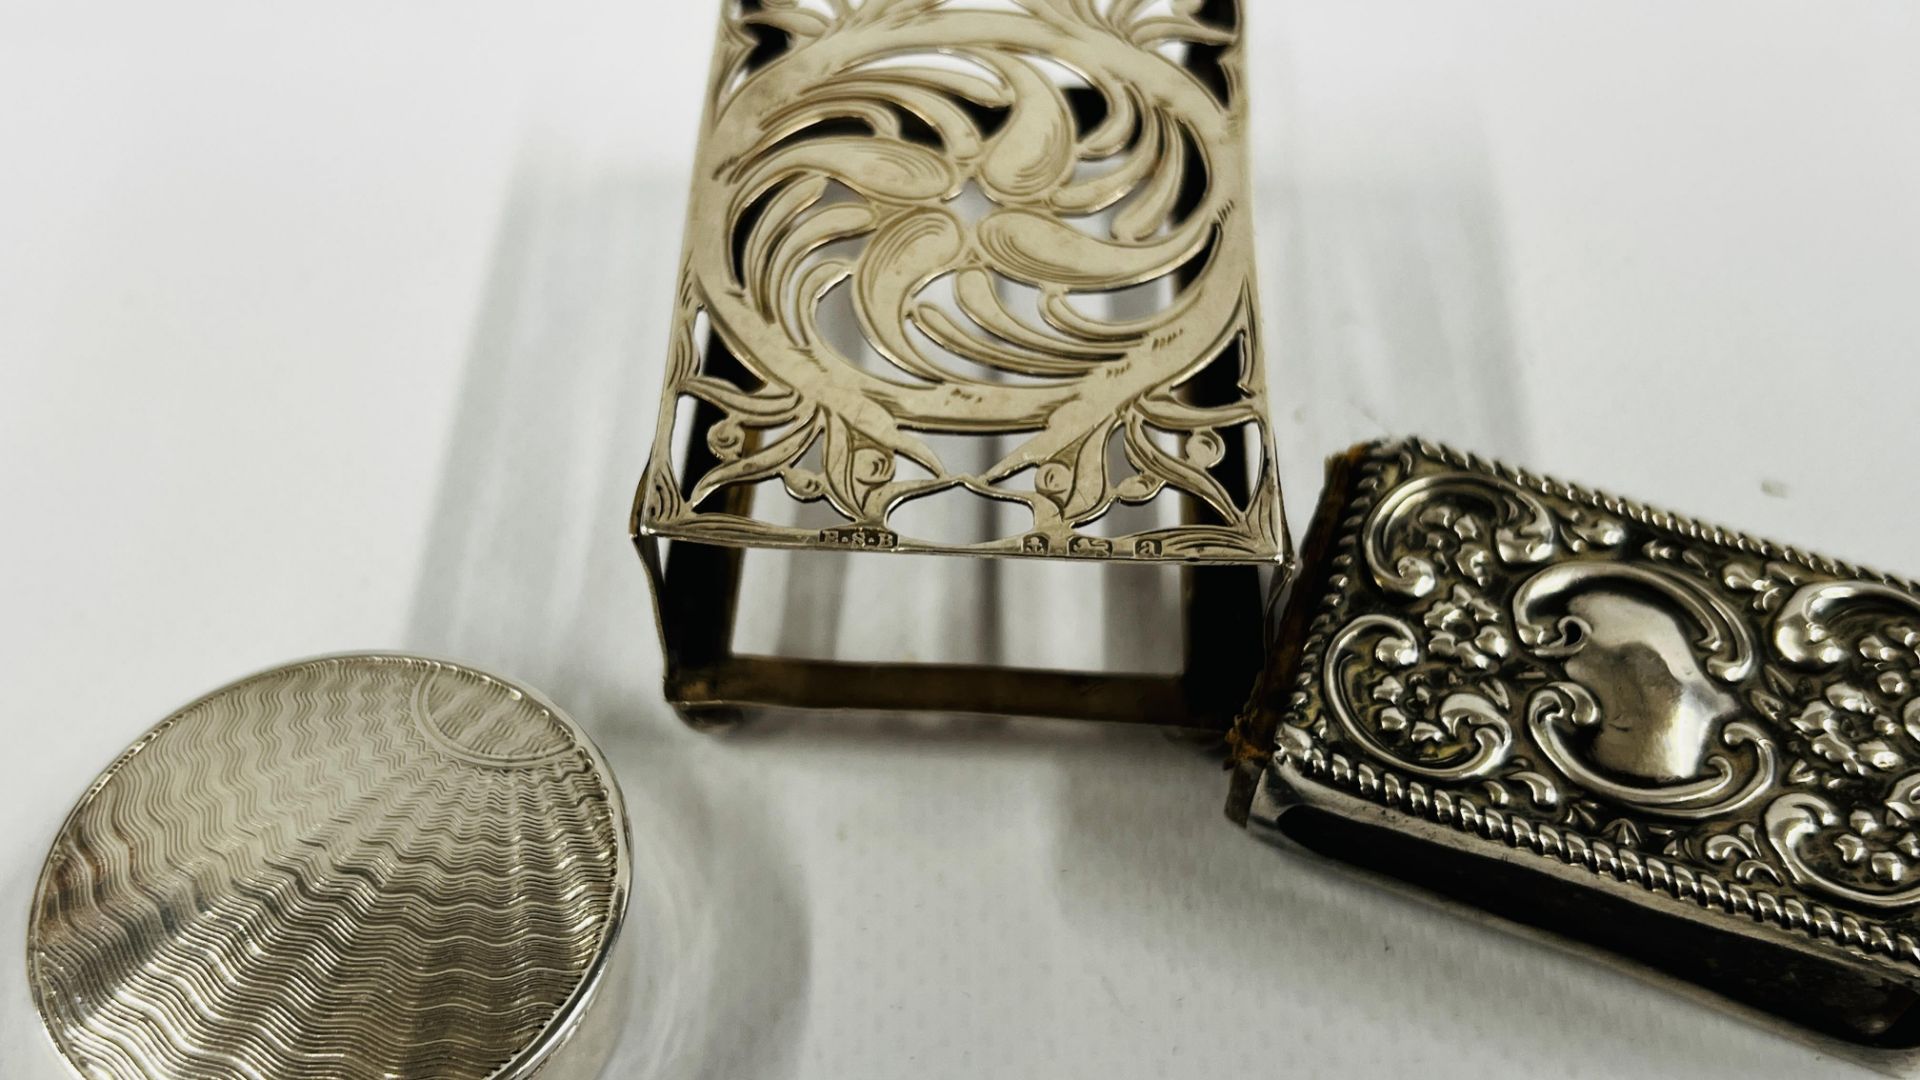 TWO SILVER MATCHBOX HOLDERS, CIRCULAR SILVER PILL BOX, TWO SILVER PROPELLING PENCILS. - Image 8 of 14